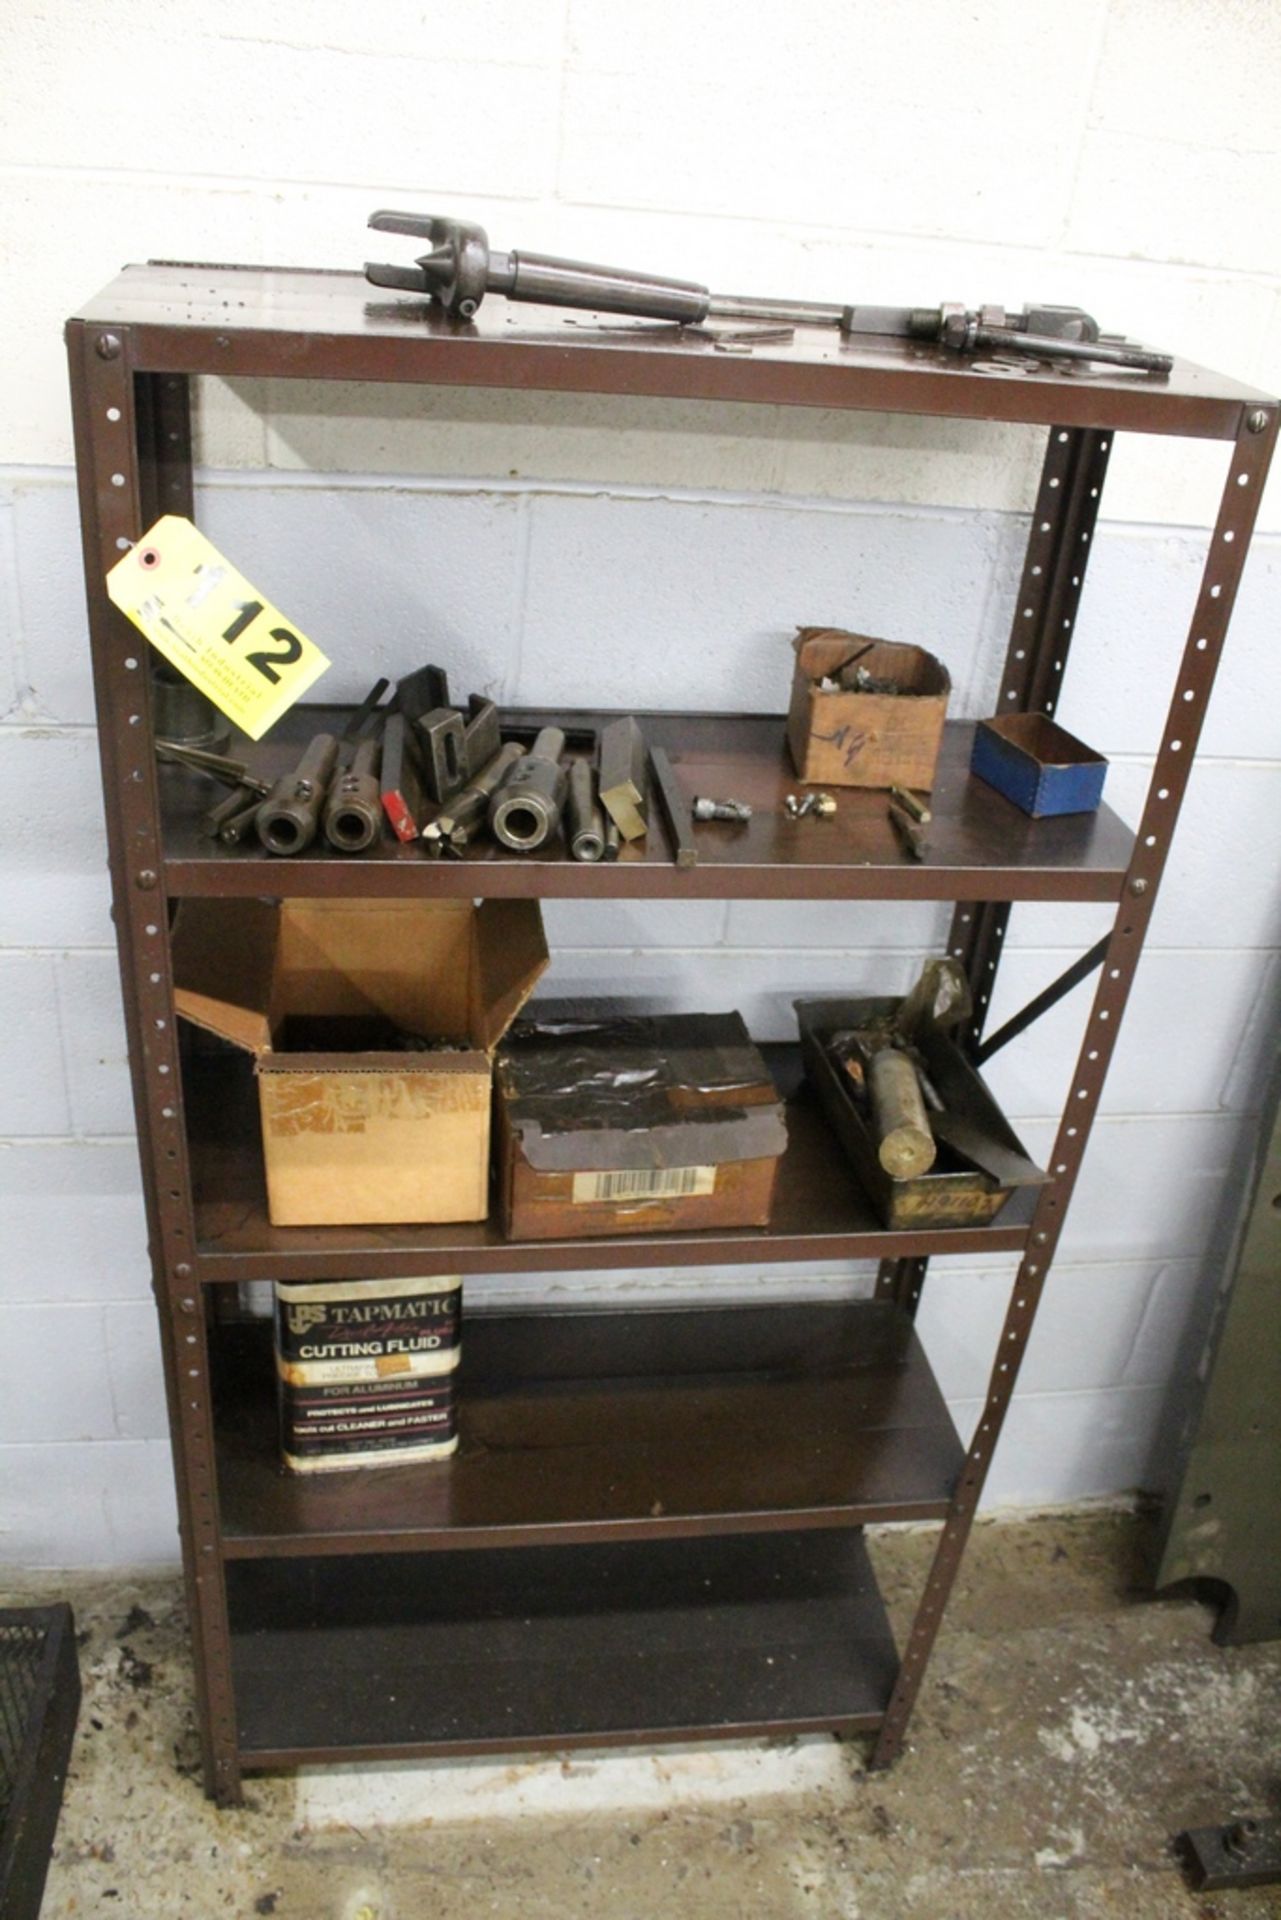 METAL SHELVING UNIT WITH CONTENTS 30" X 11" X 58"